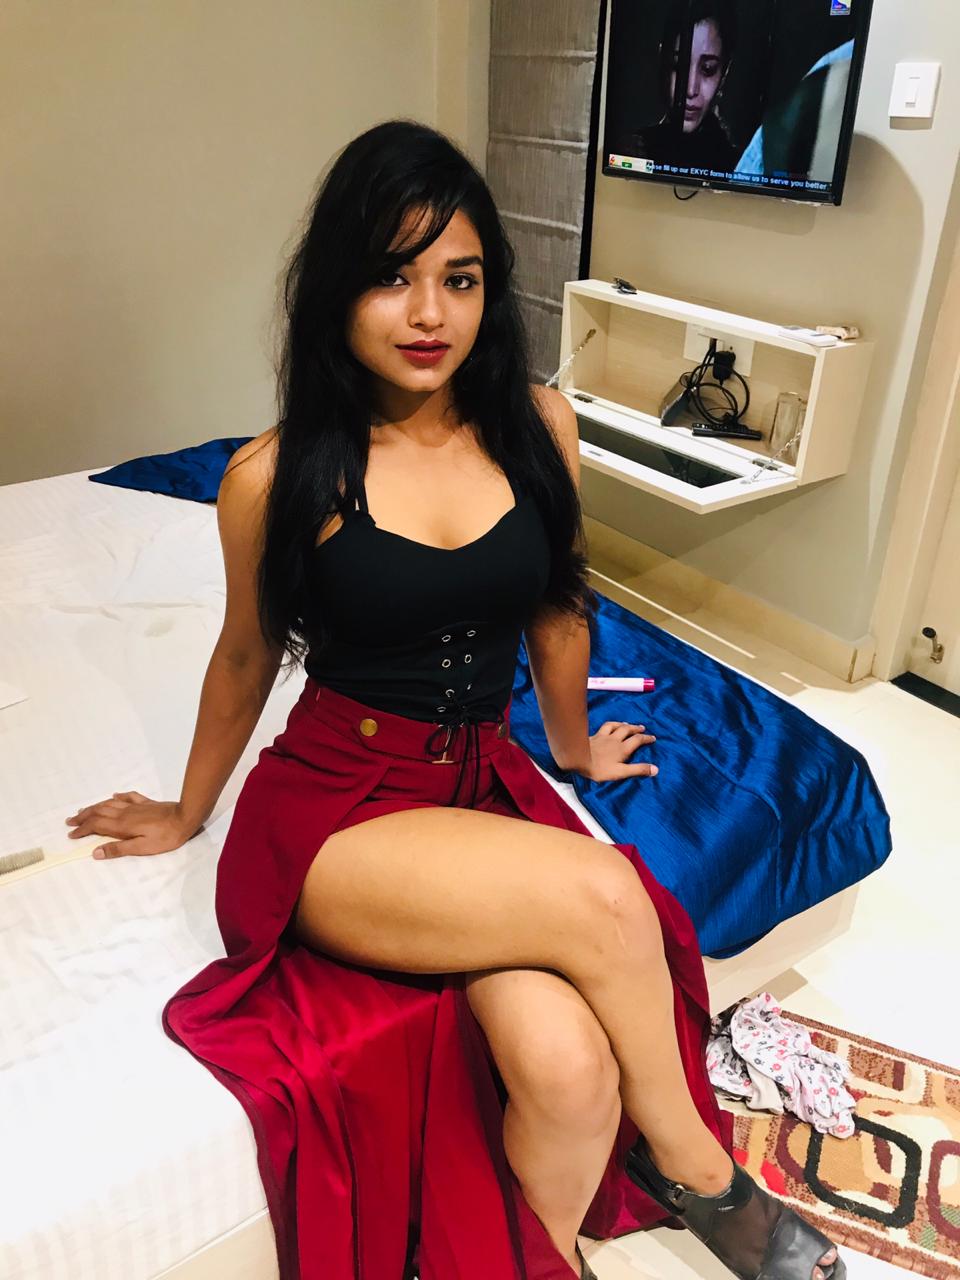 Call Girls in Defence colony 96*67*25*96*44 TOP CLASS VIP MODEL AVAILABLE genuine SERVICE short 2000